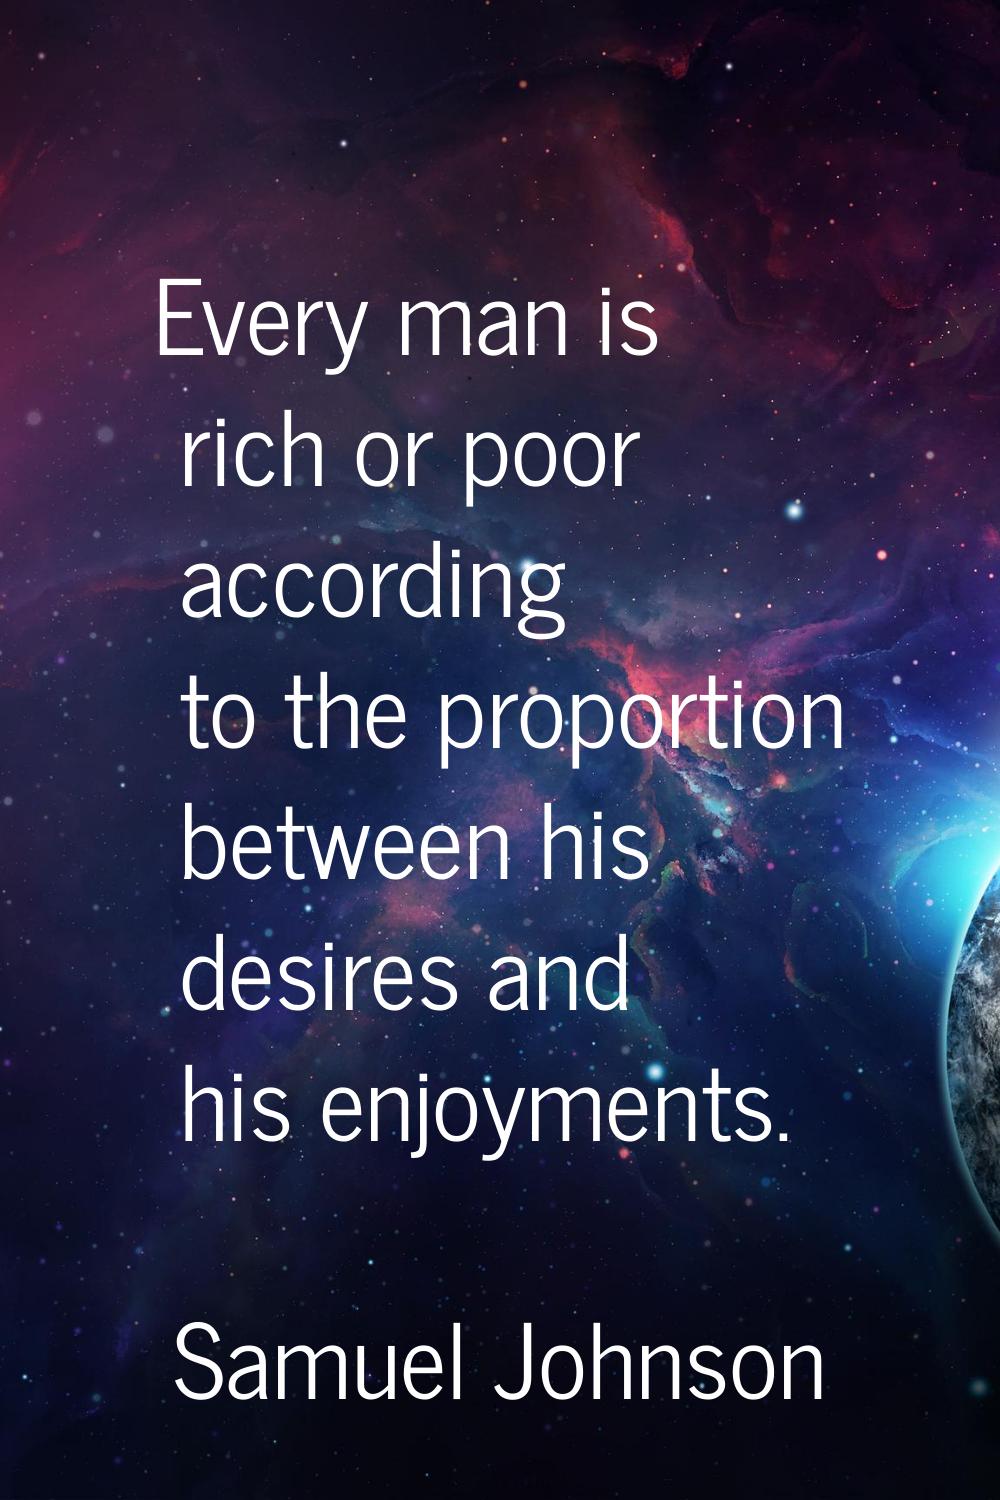 Every man is rich or poor according to the proportion between his desires and his enjoyments.